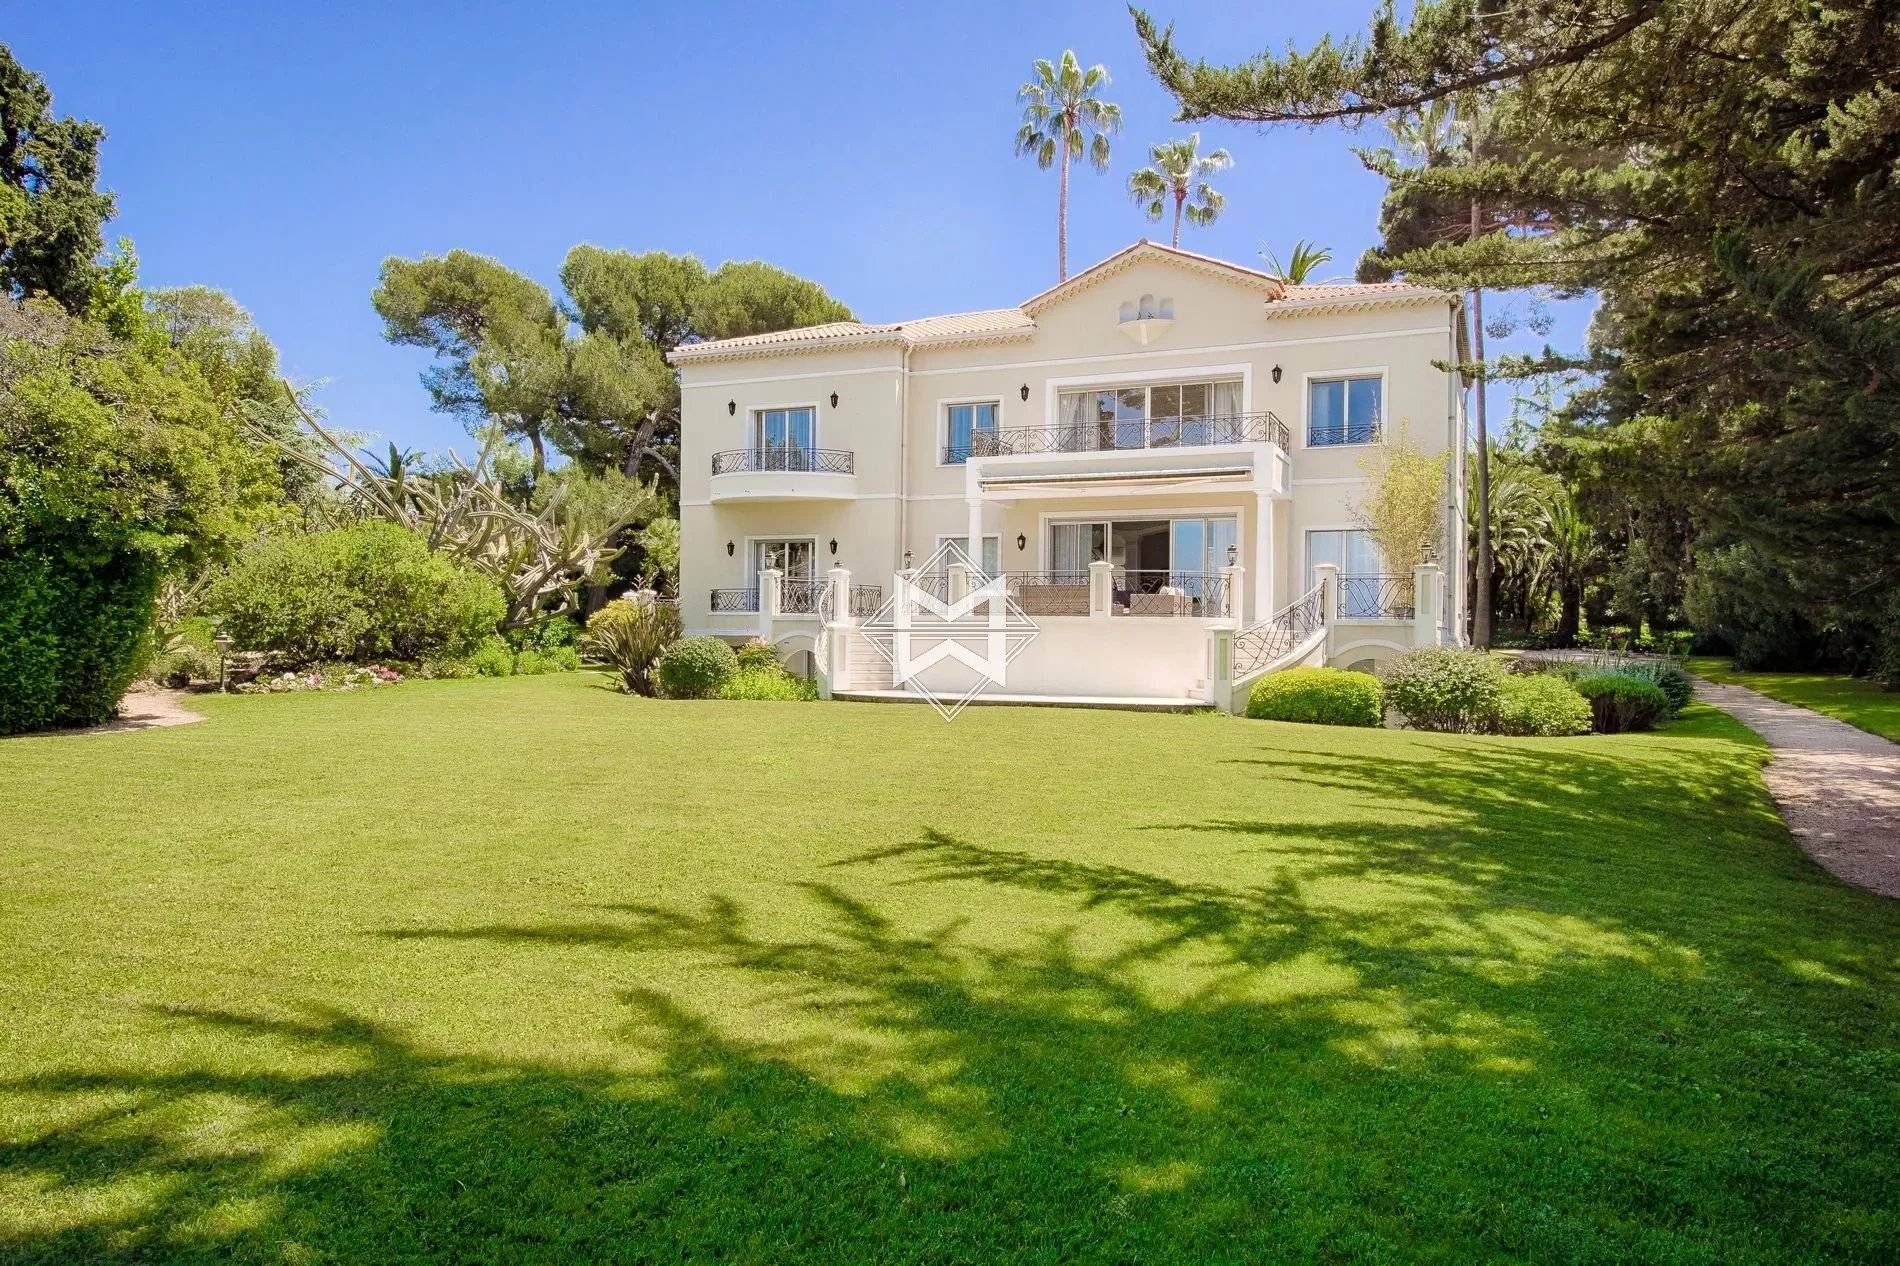 Magnificent villa built in the Palladian style